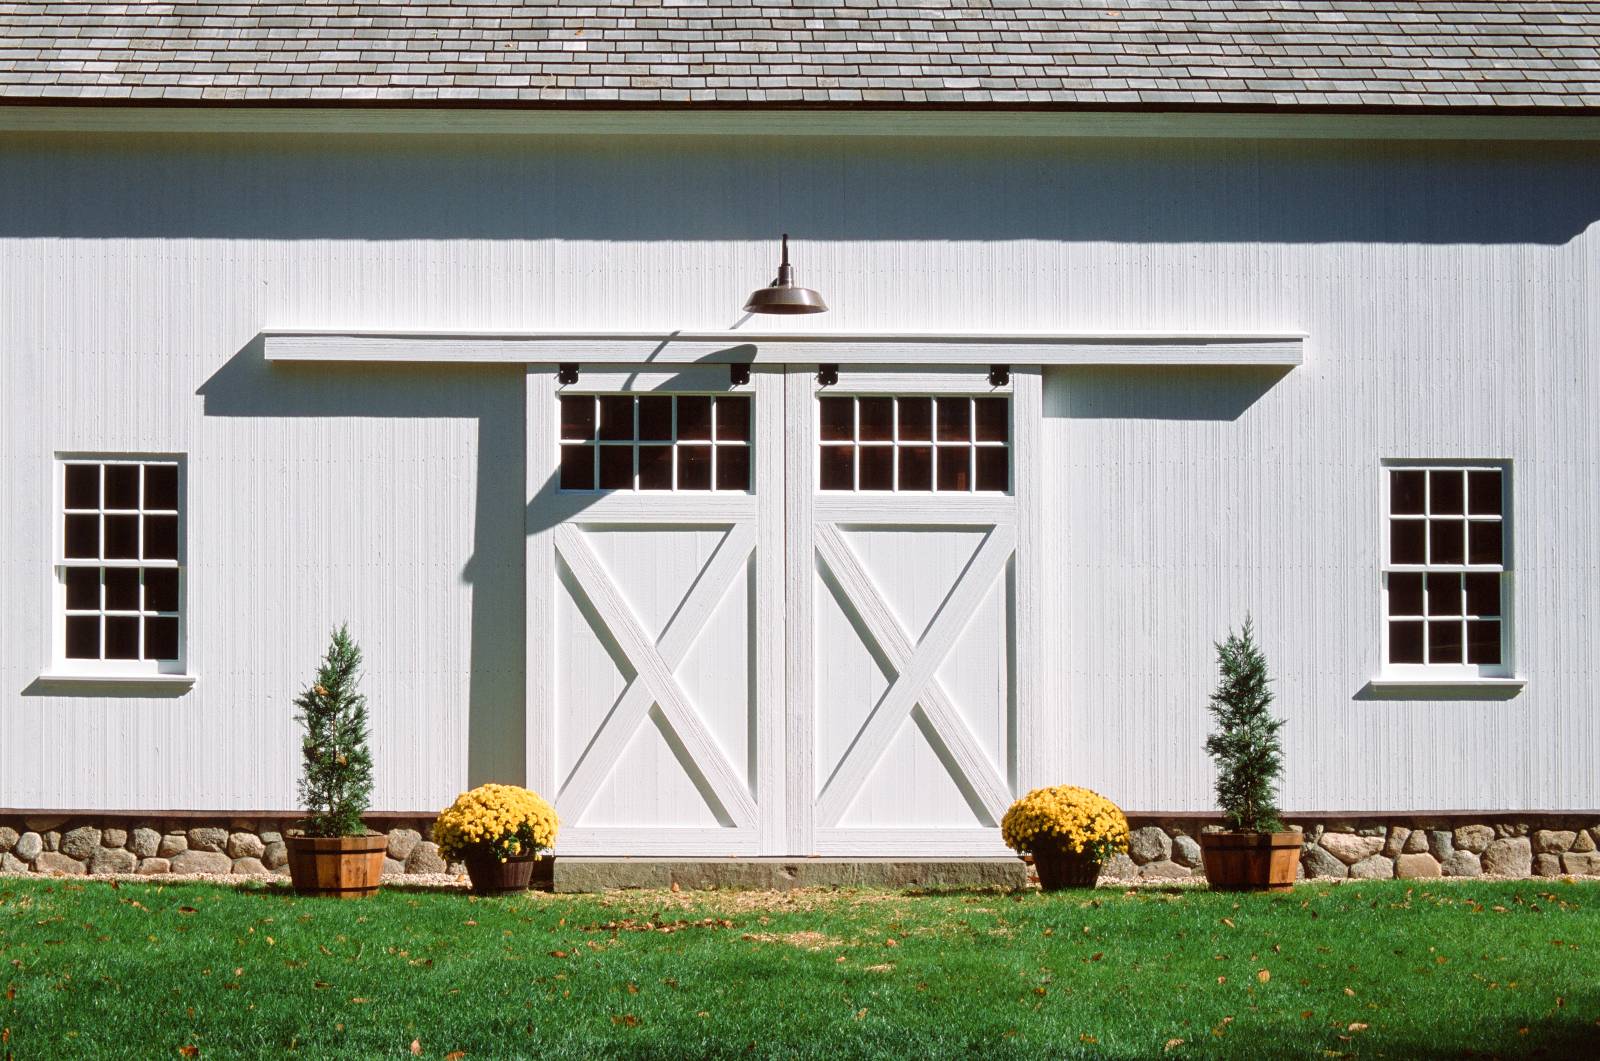 Split sliding barn doors closed (also notice the stone capped foundation)